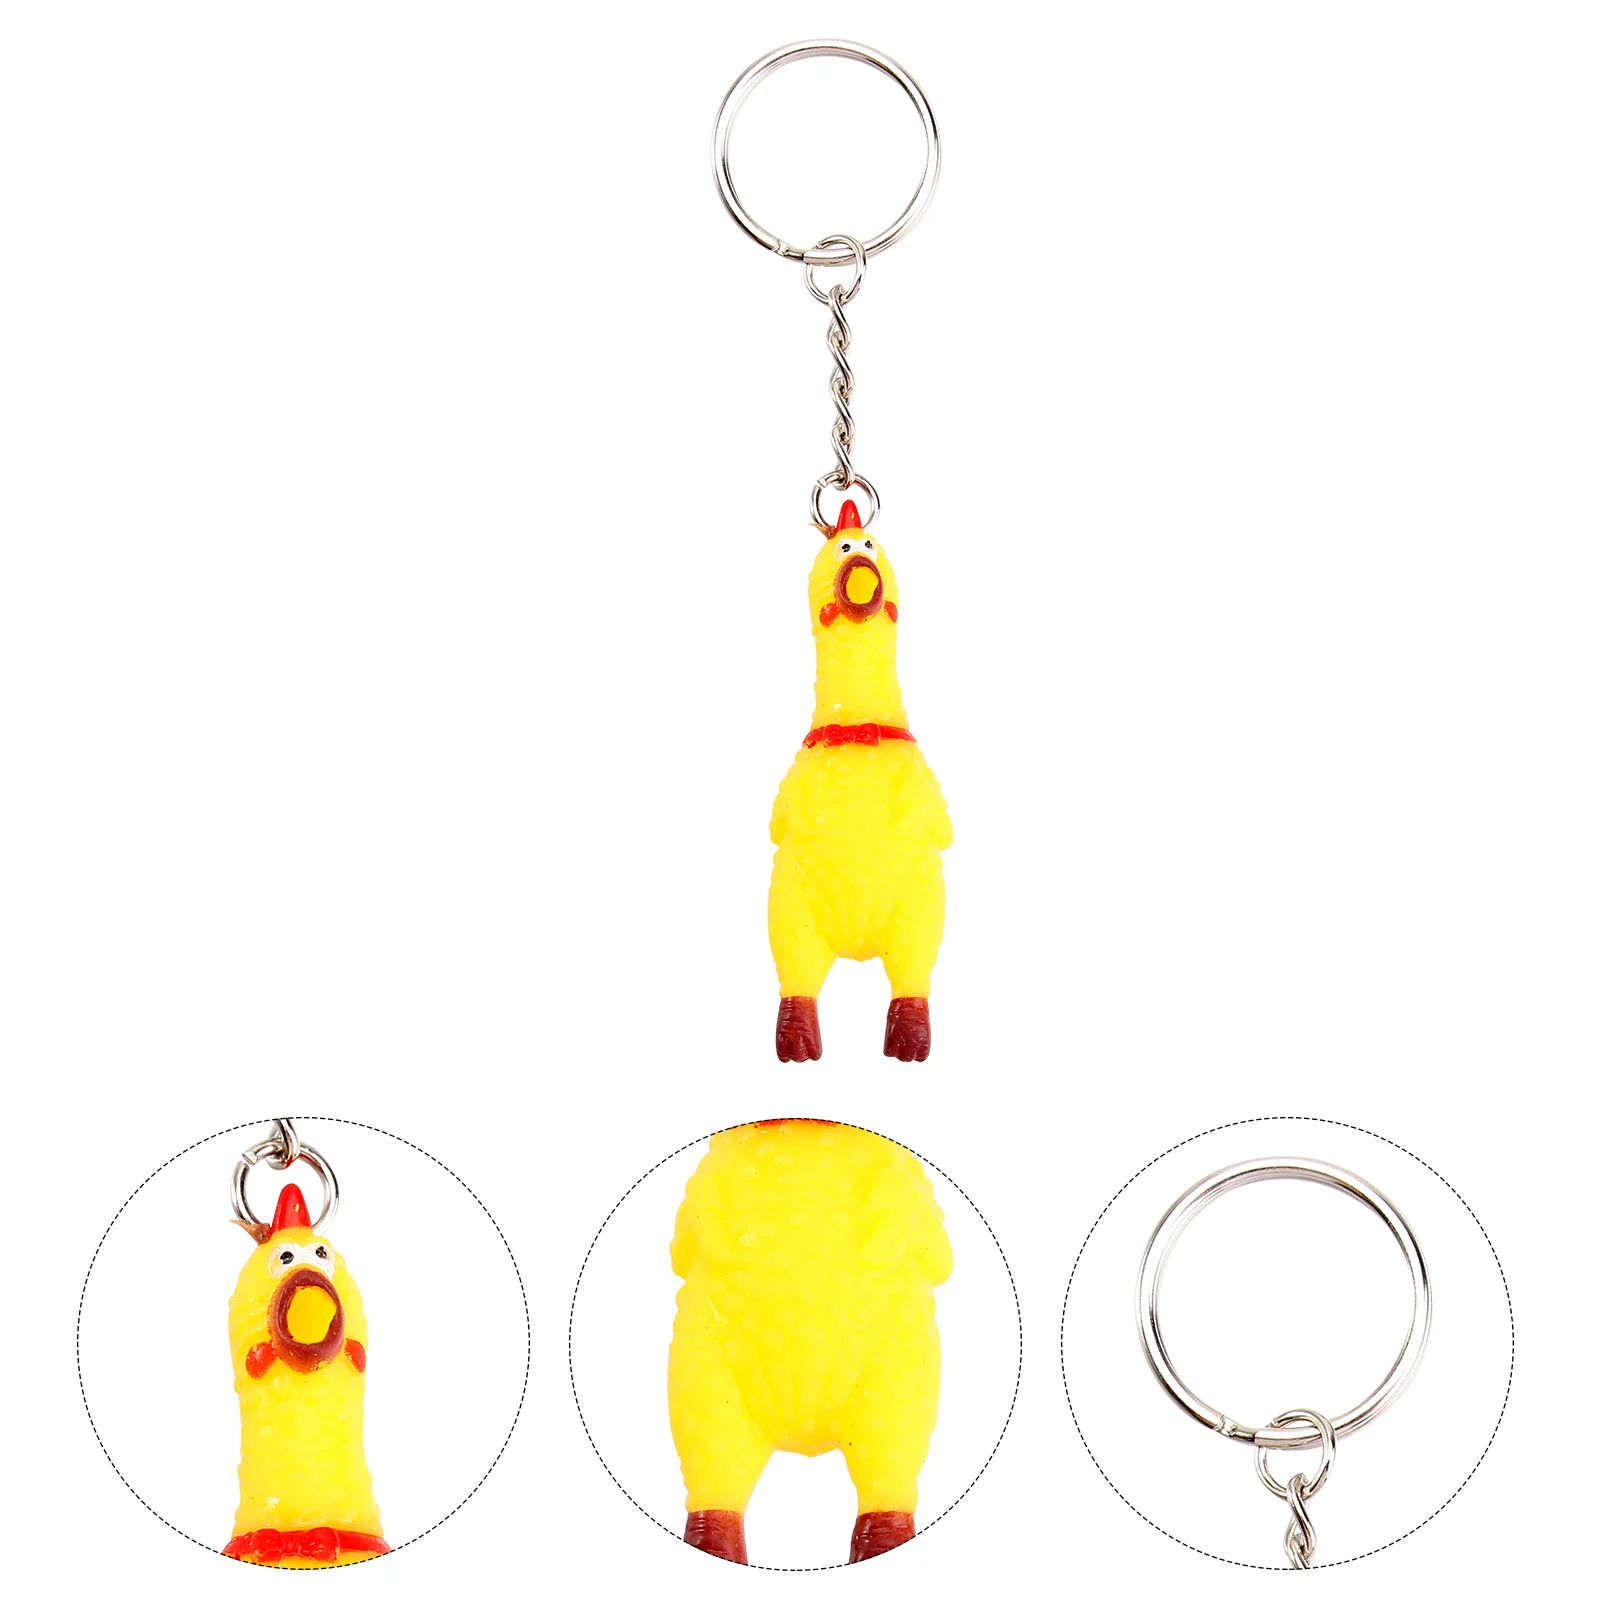 

Chicken Keychain Rubber Screamingsqueeze Pendant Keymini Charm Squeaking Squeaky Dog Keychains Lanyard Chains Animal Bag